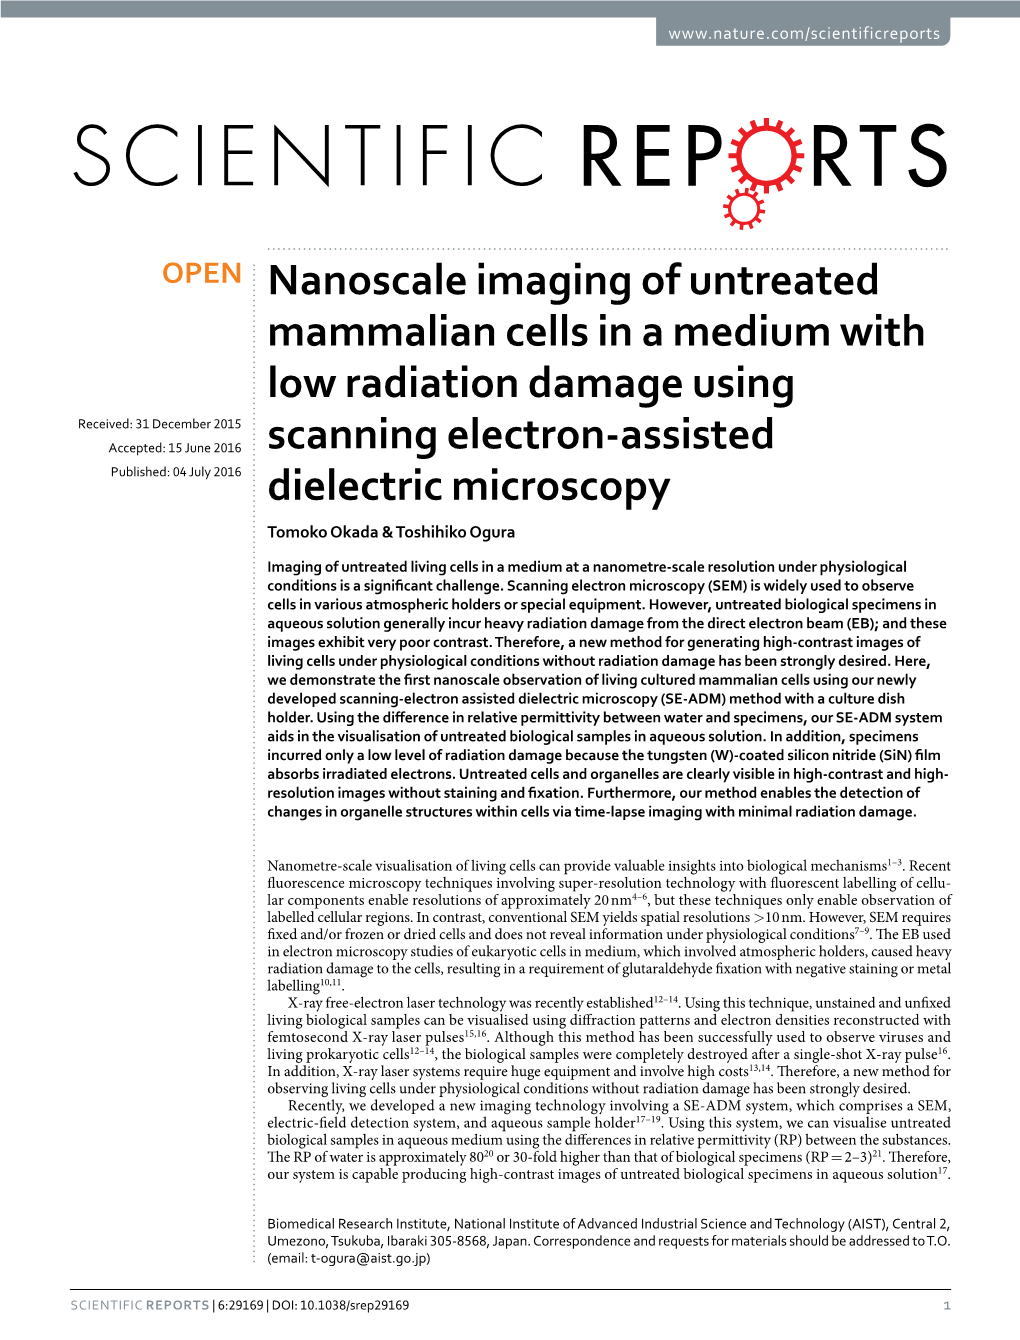 Nanoscale Imaging of Untreated Mammalian Cells in a Medium With